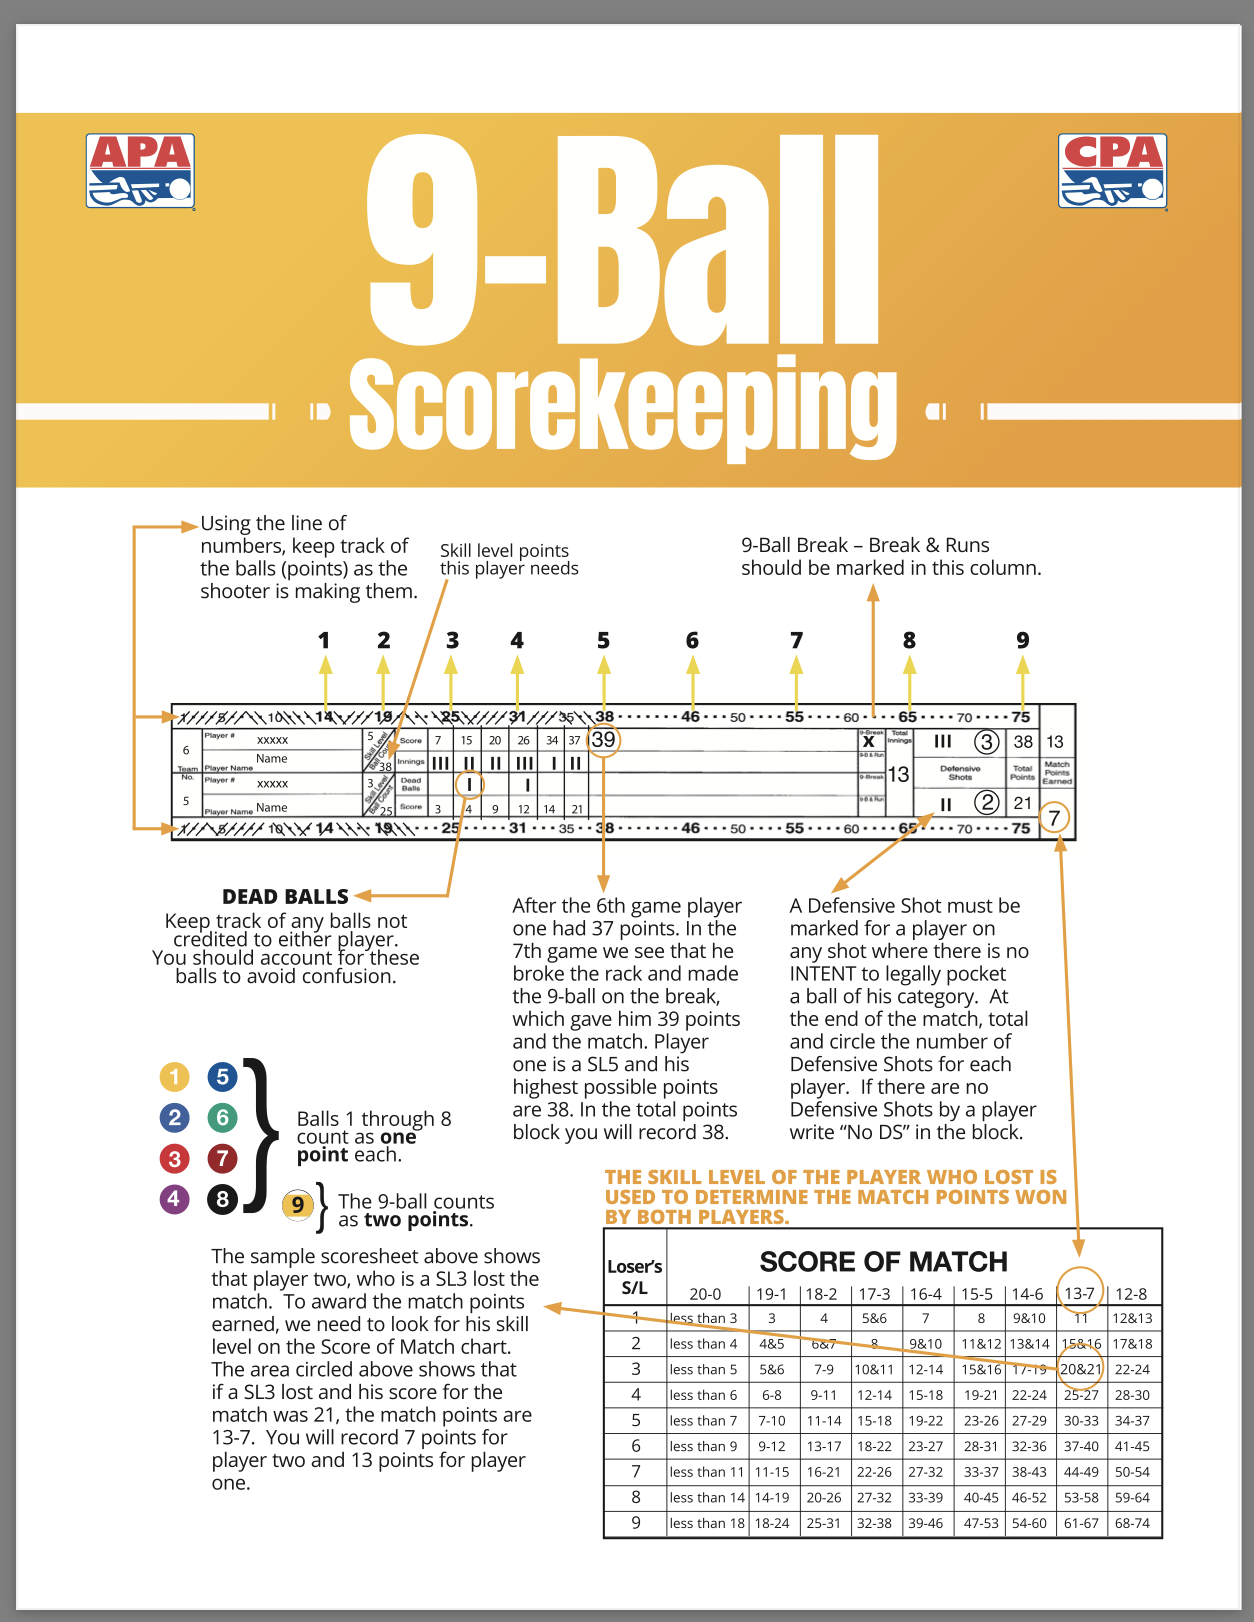 How to score 9-Ball flier